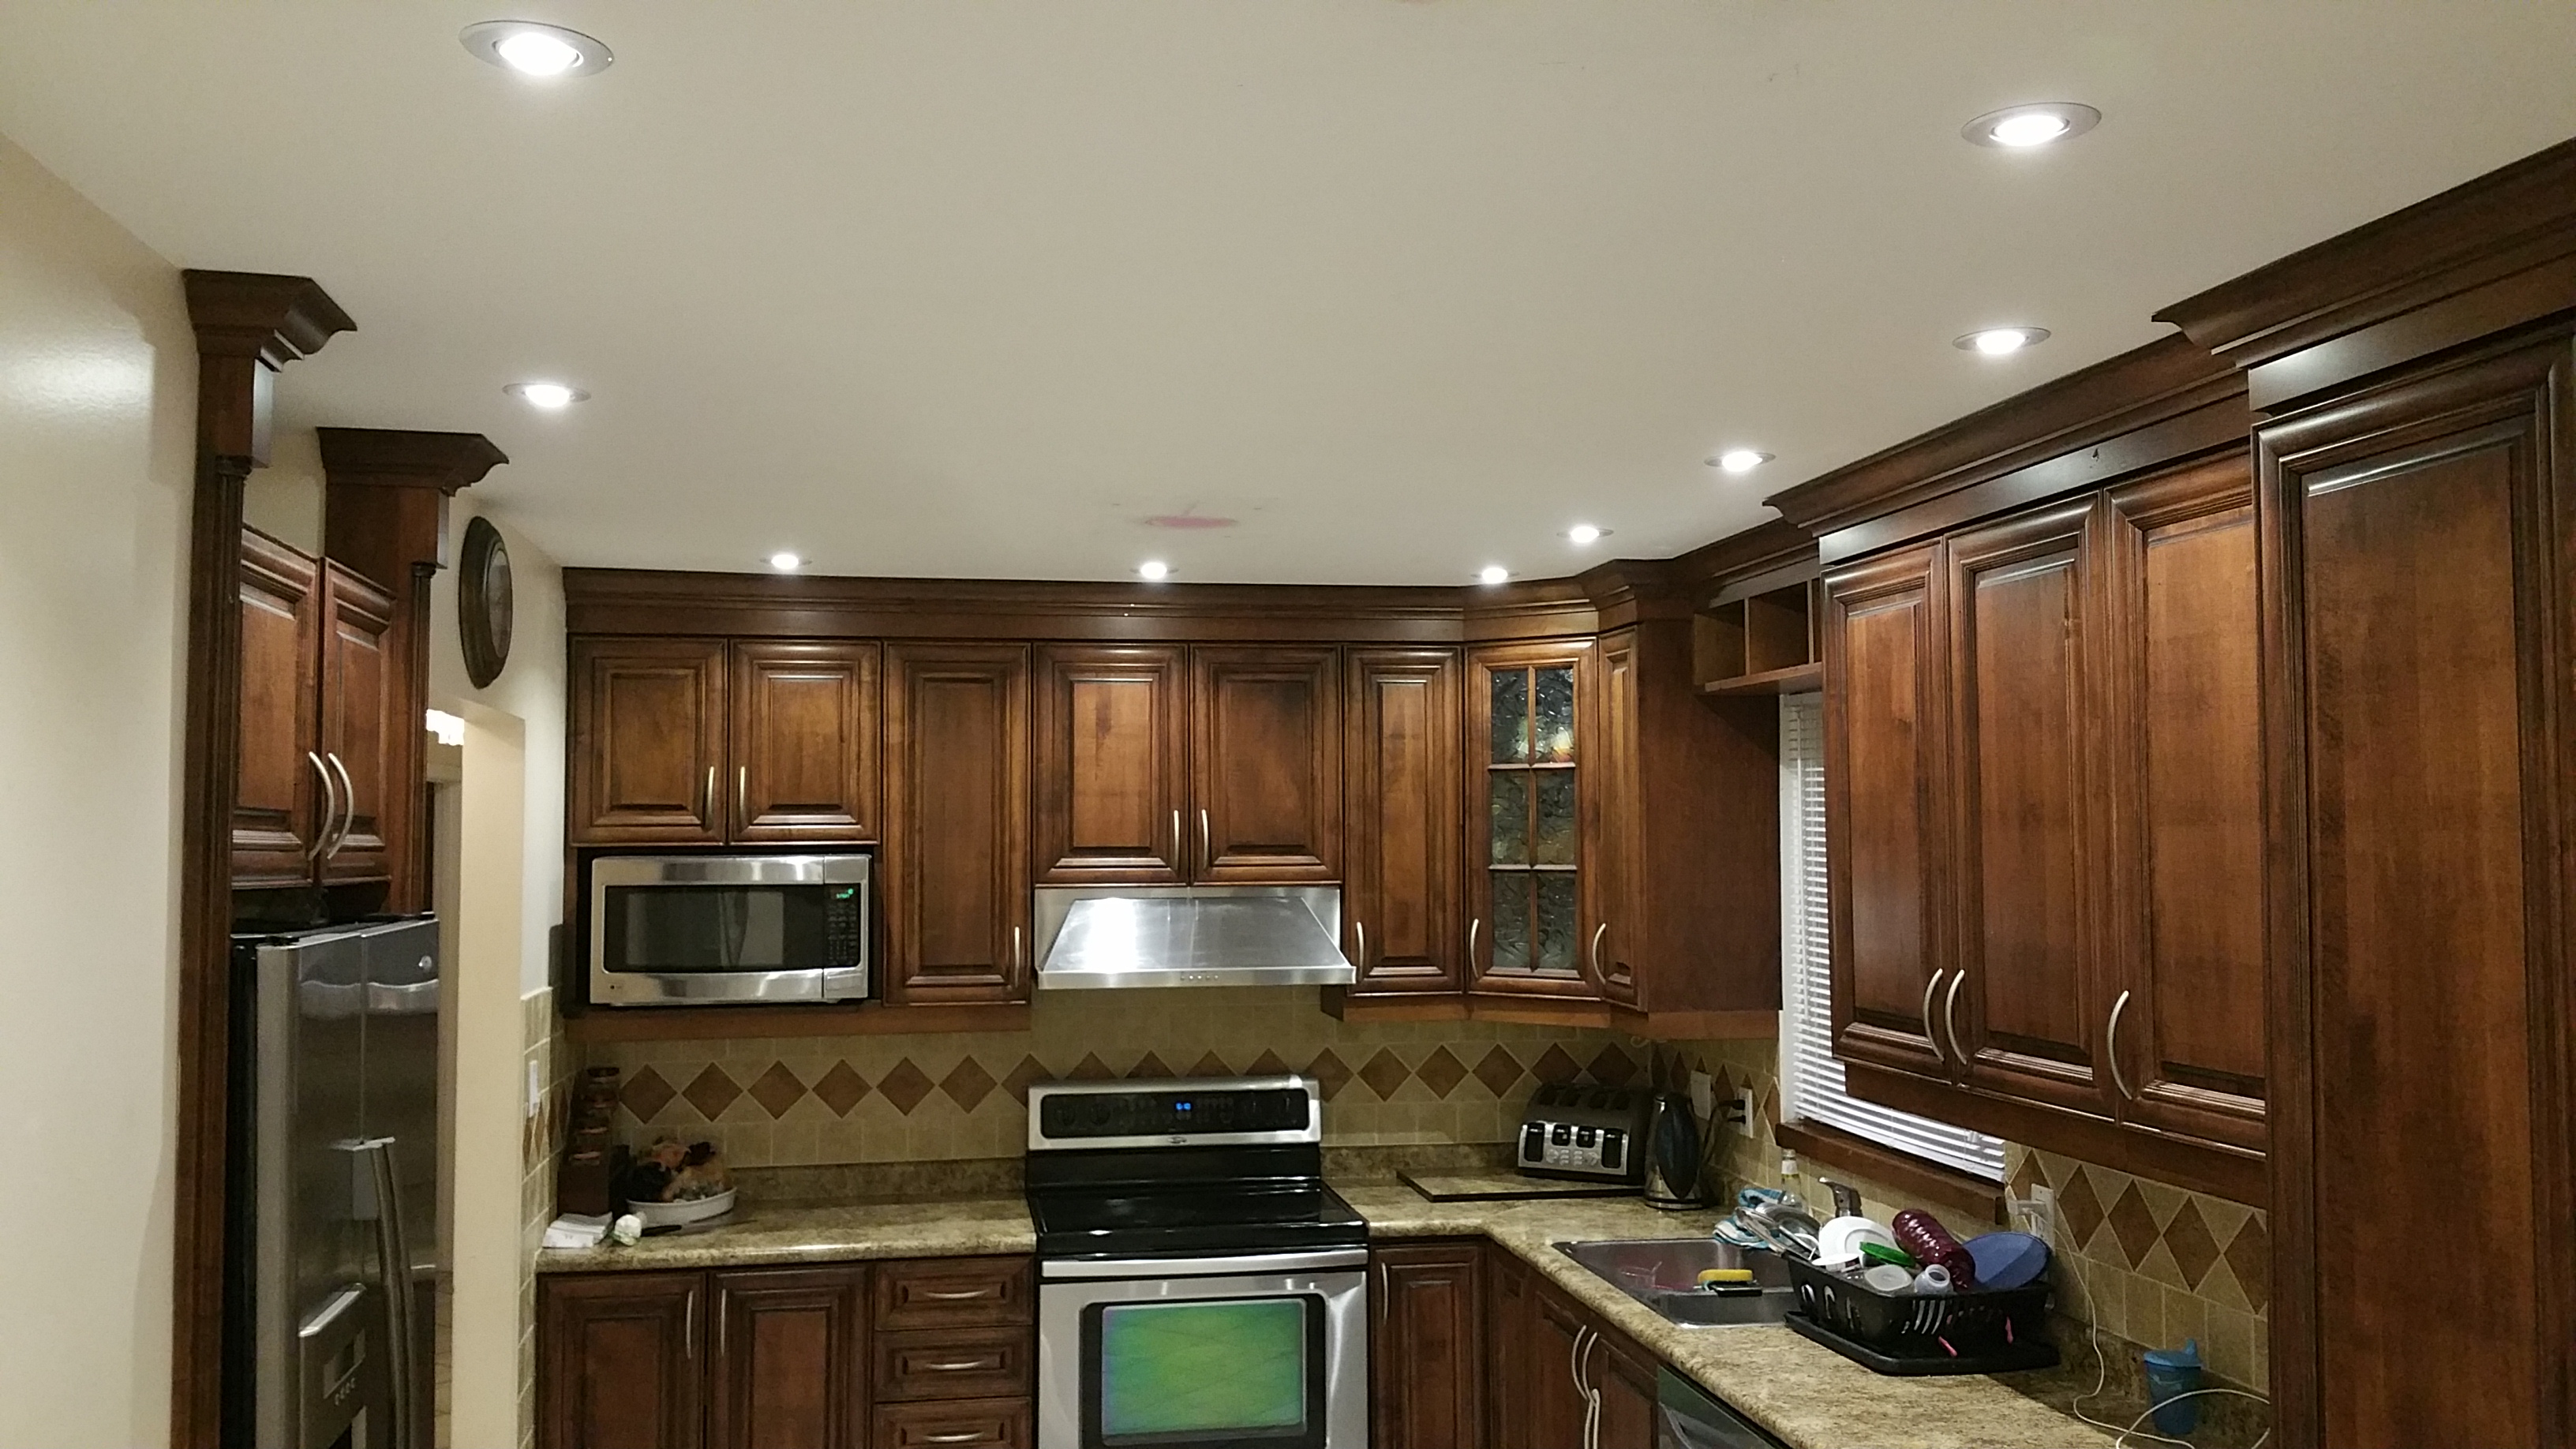 Top Five Renovations That Ad Value To, How To Place Pot Lights In Kitchen